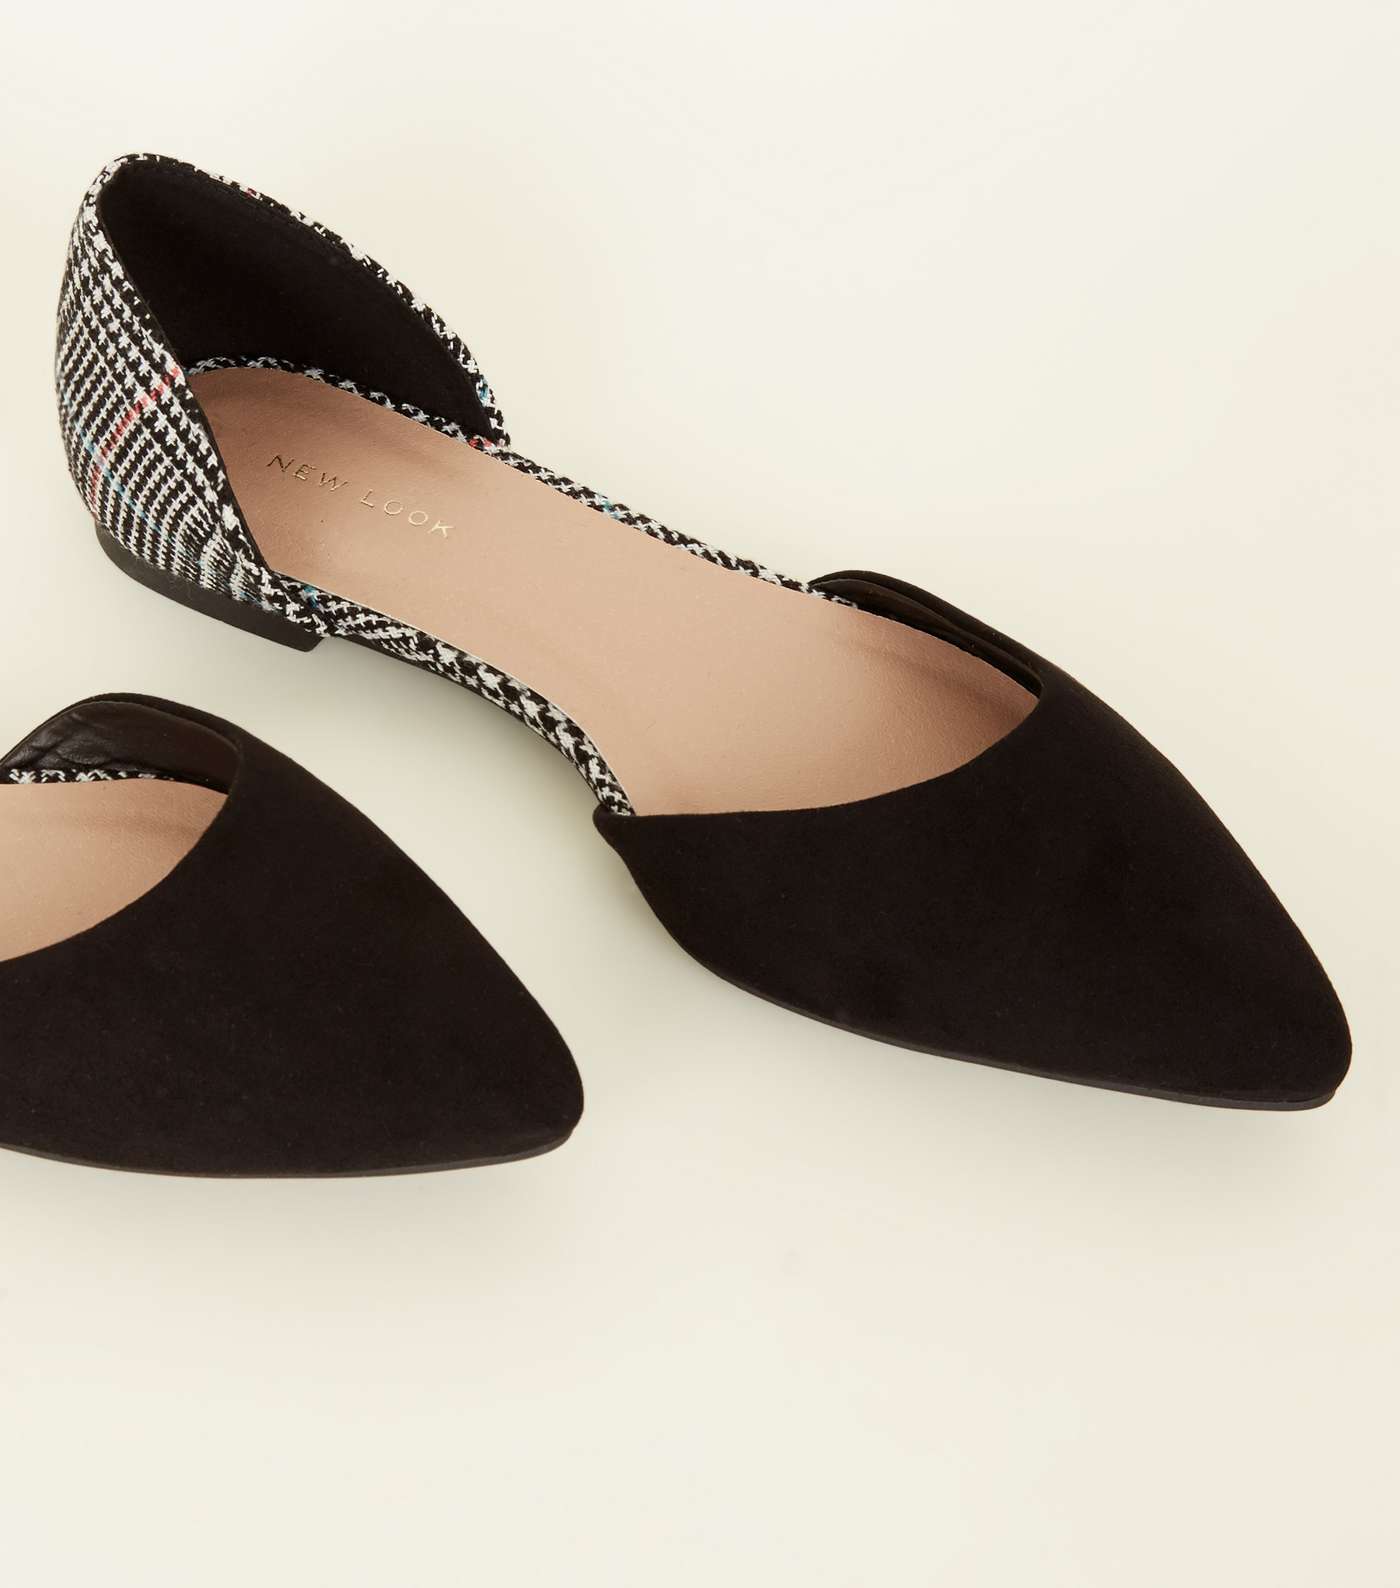 Black Woven Houndstooth Pointed Ballet Pumps Image 4